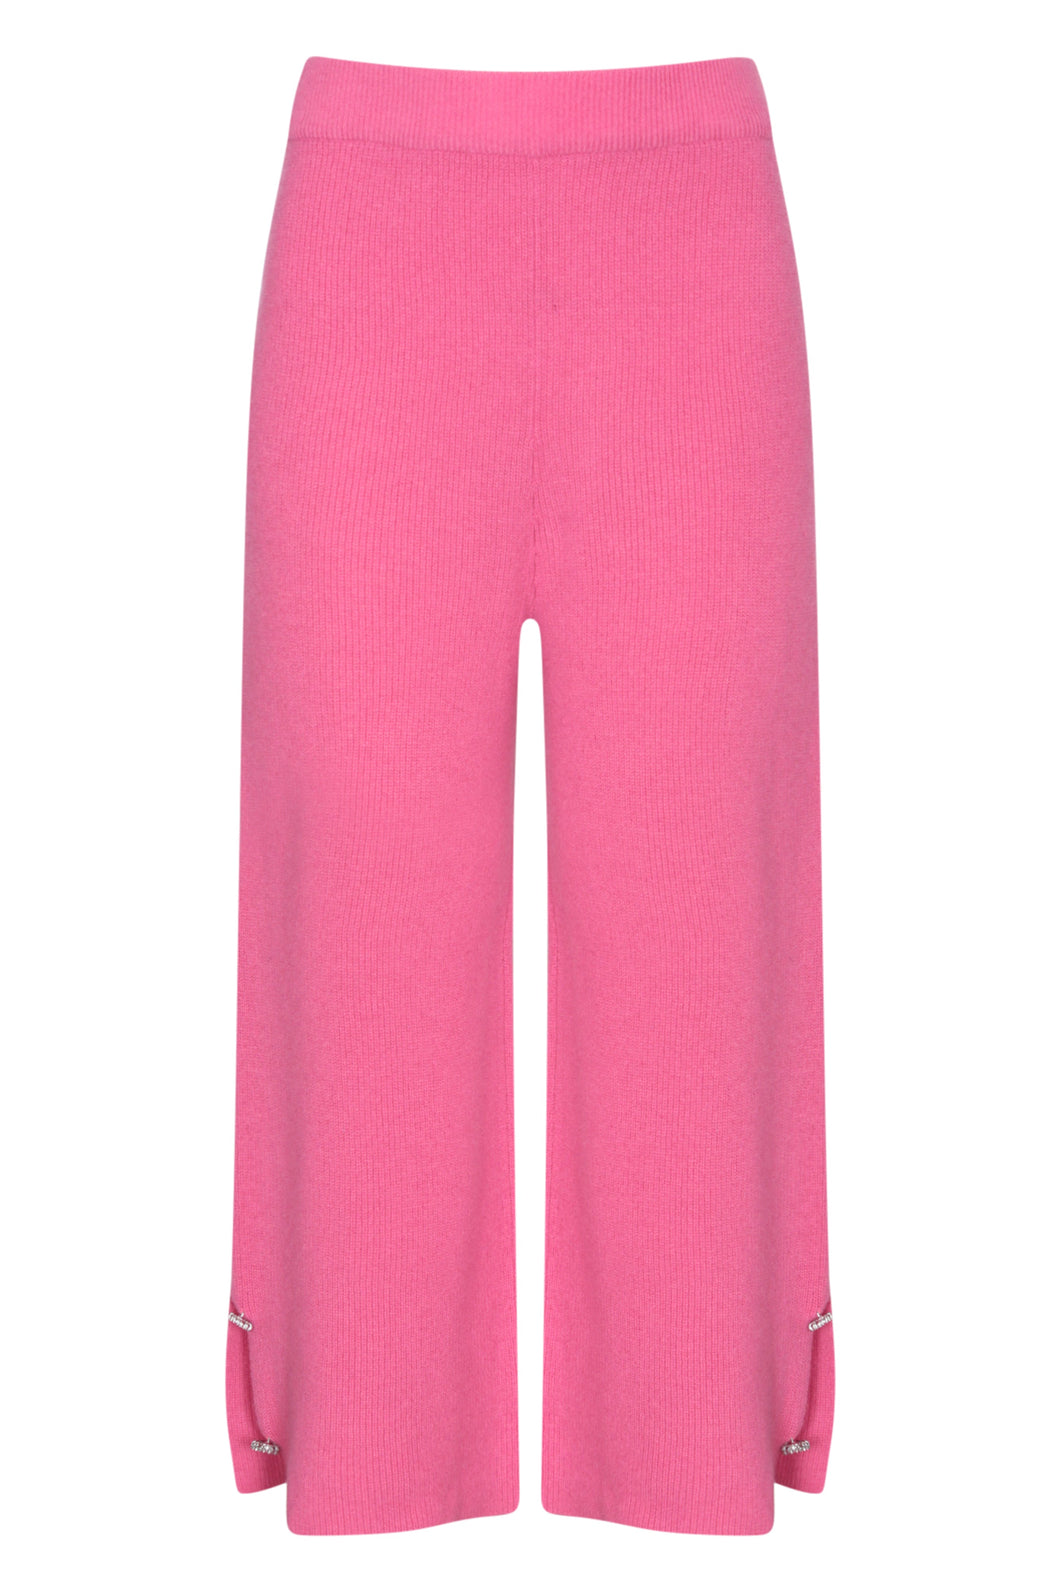 Cropped Pants with Button Detail in Watermelon